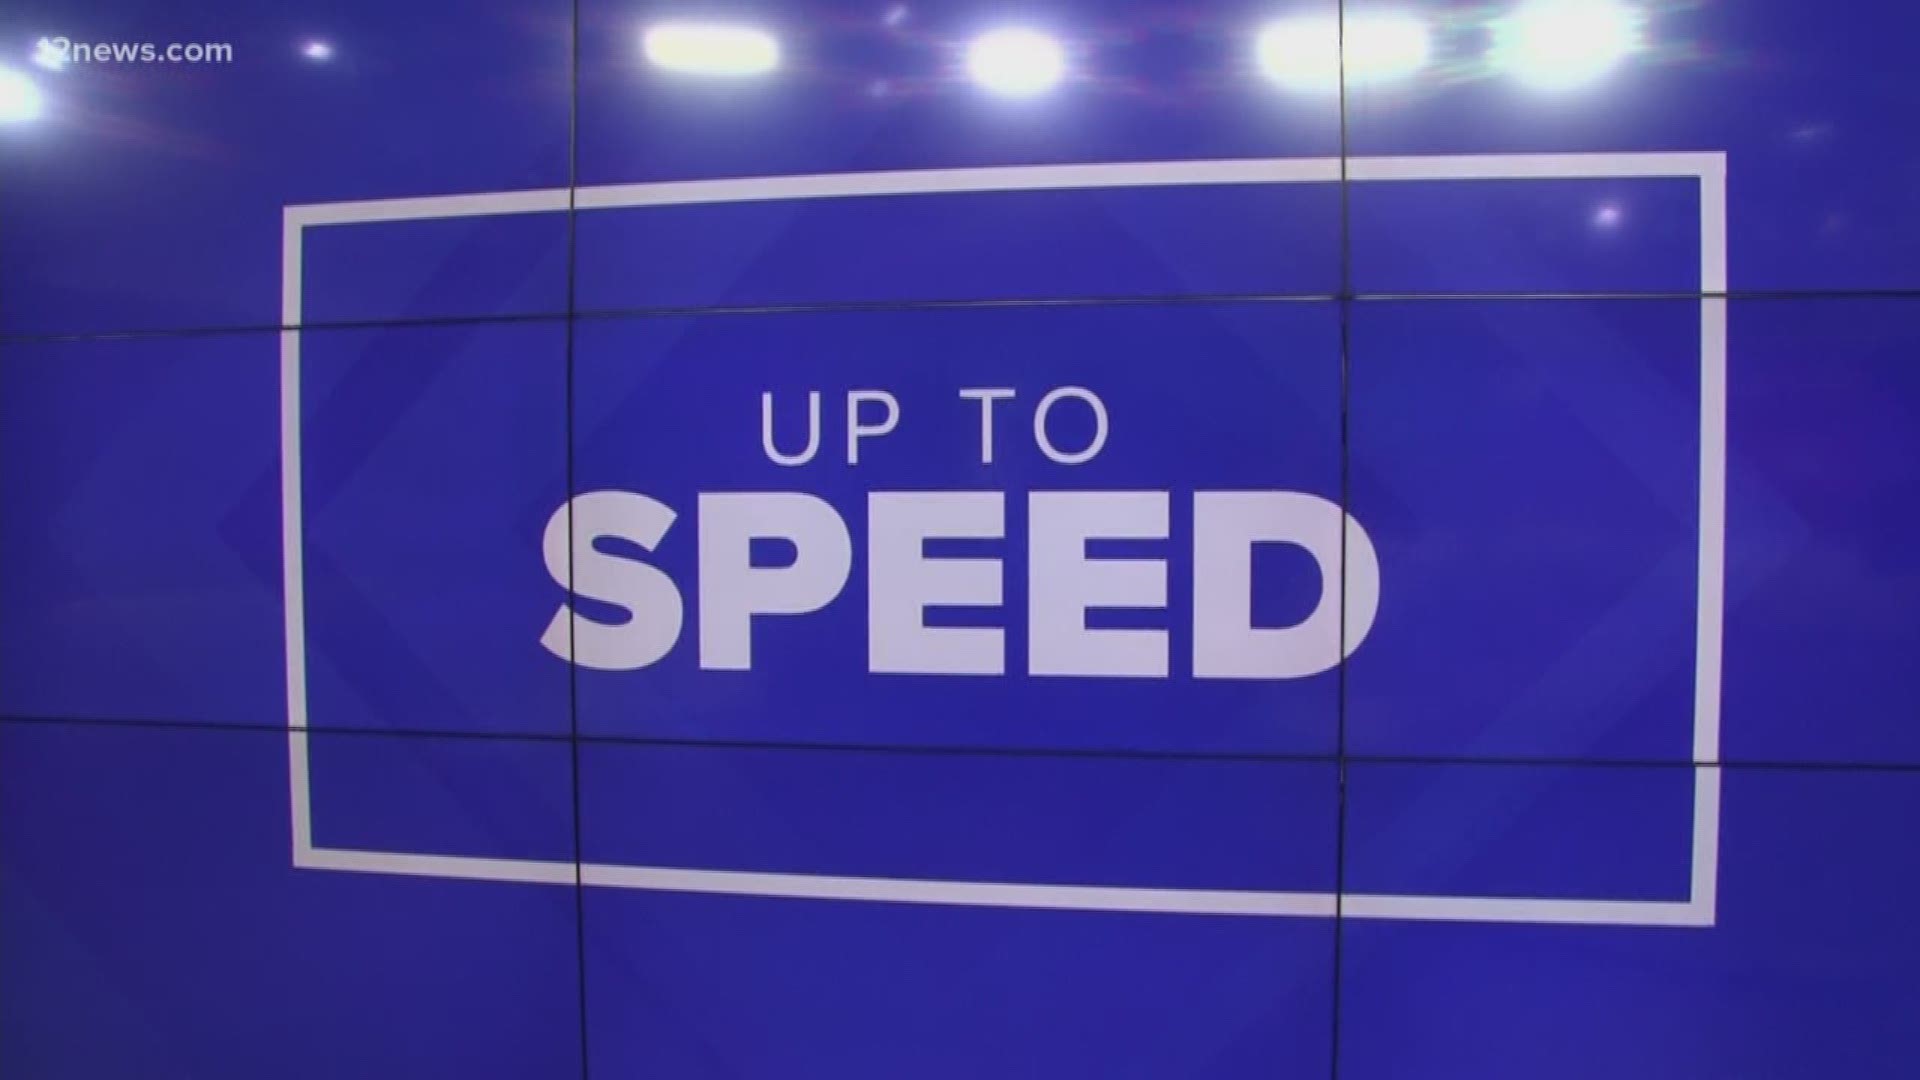 We get you "Up to Speed" on the latest news happening around the Valley on Wednesday afternoon.